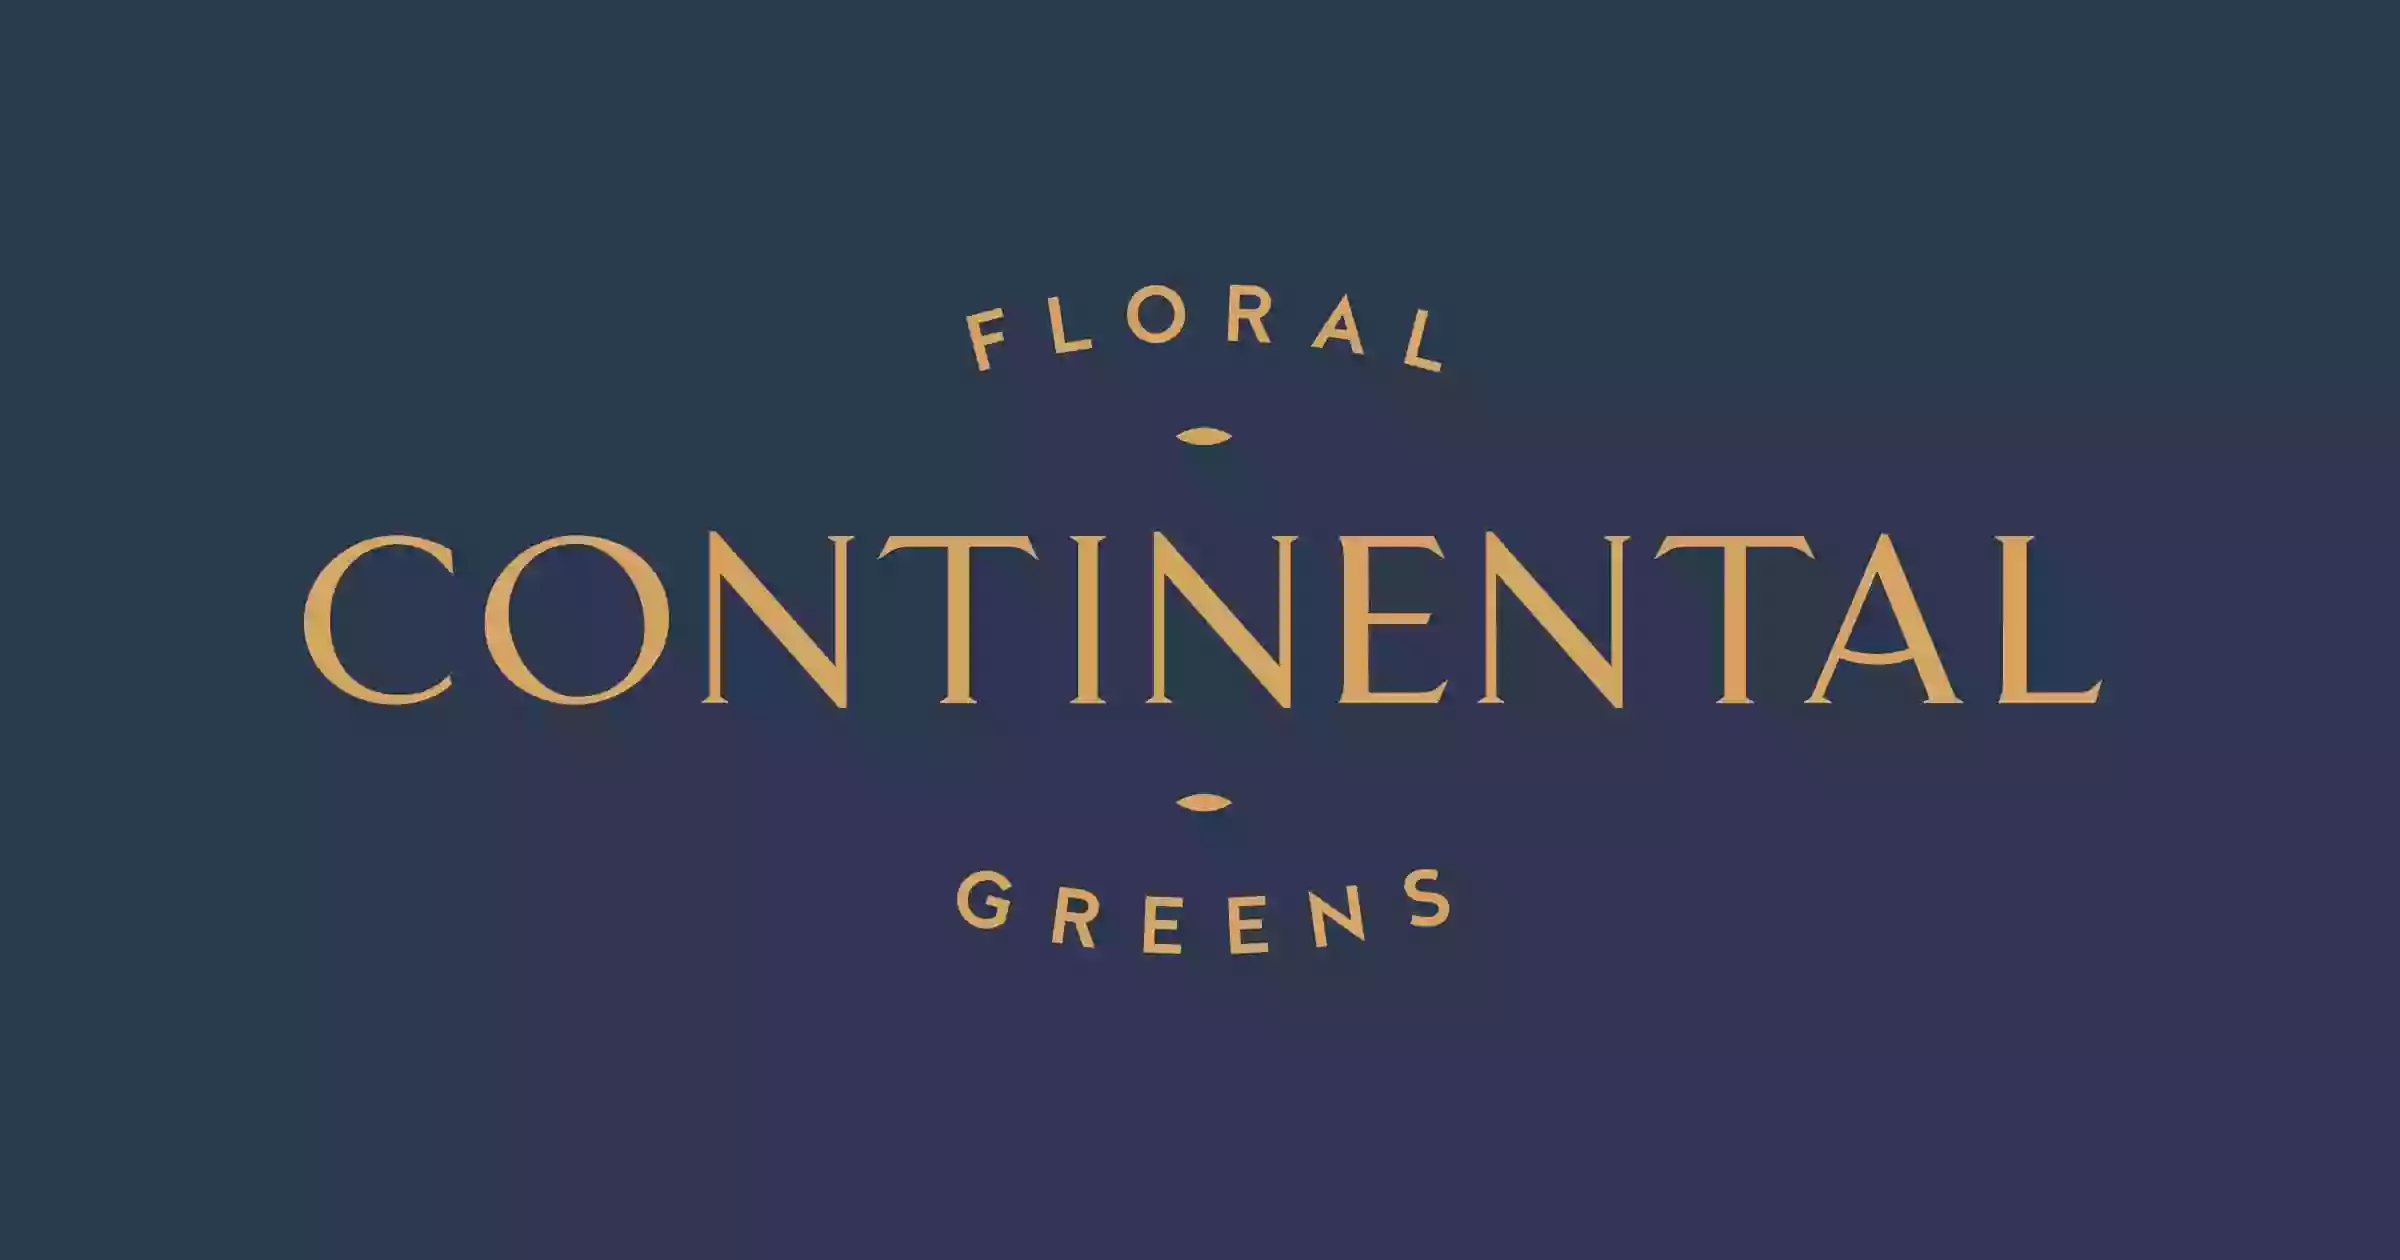 Continental Floral Greens